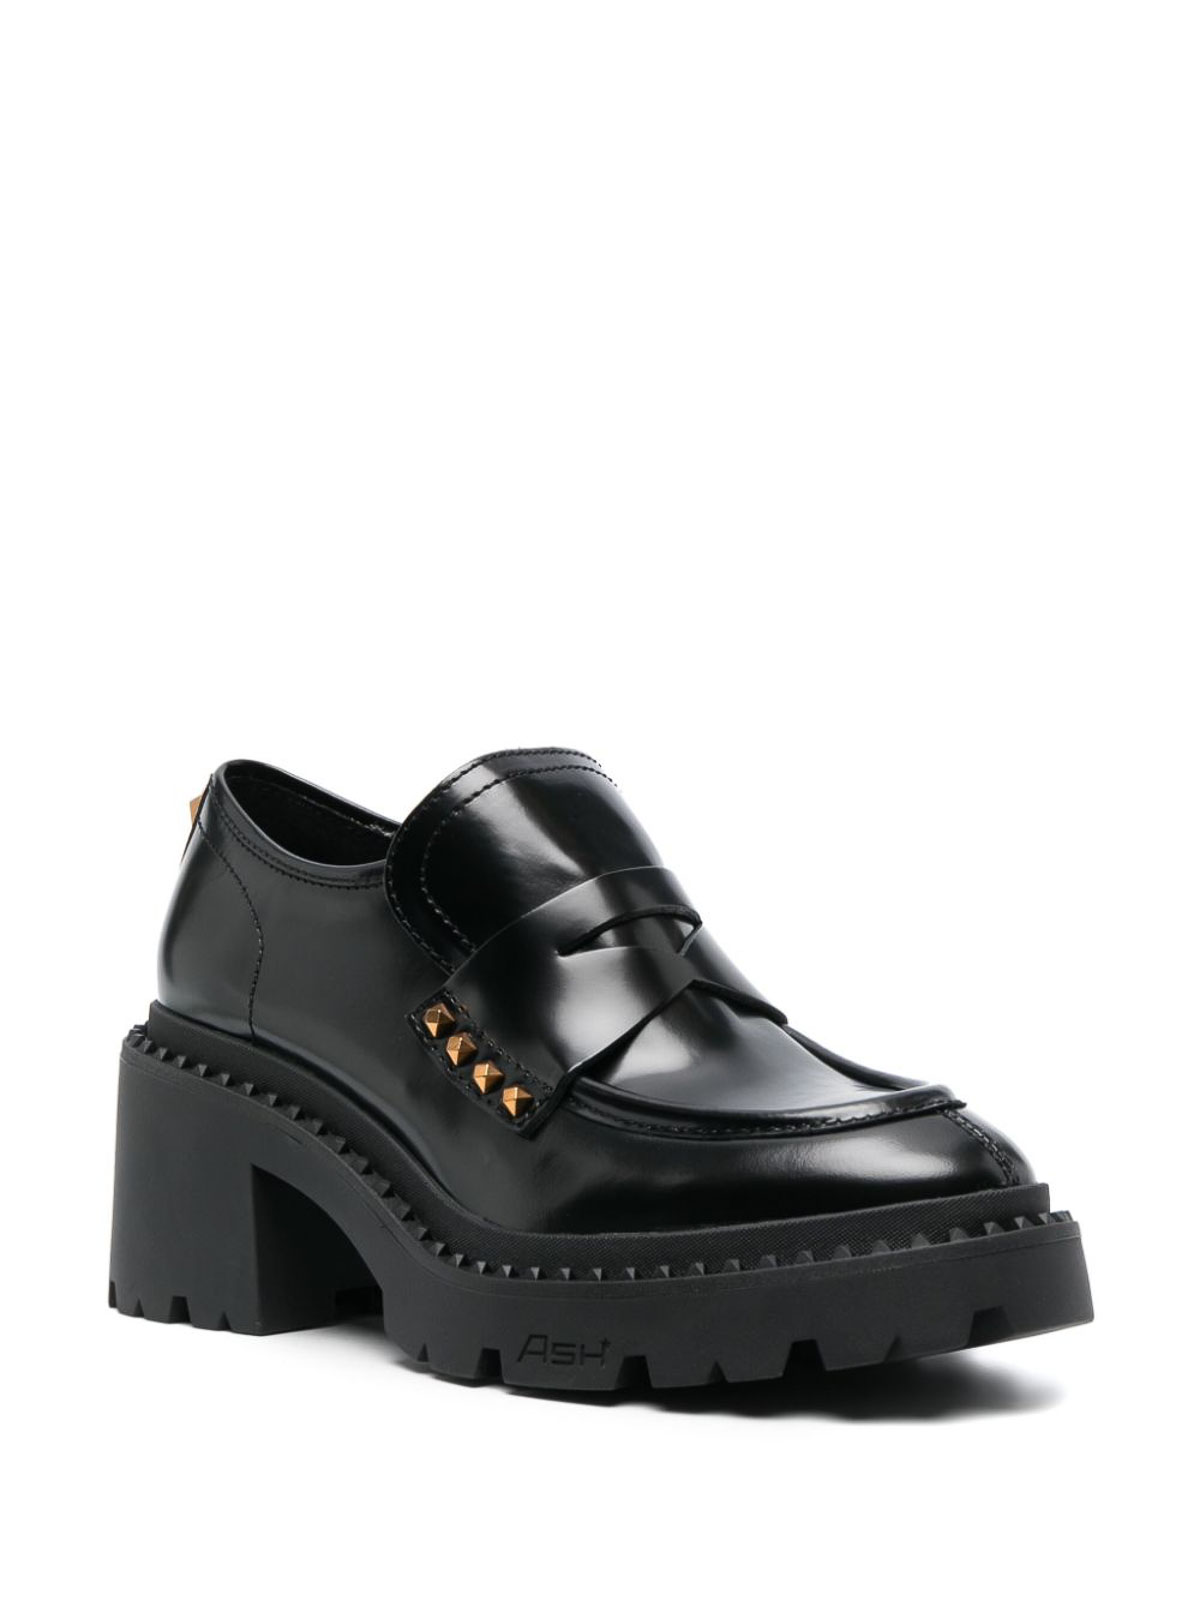 Loafers & Slippers Ash - nelson studded loafers - F23NELSONSTUD01